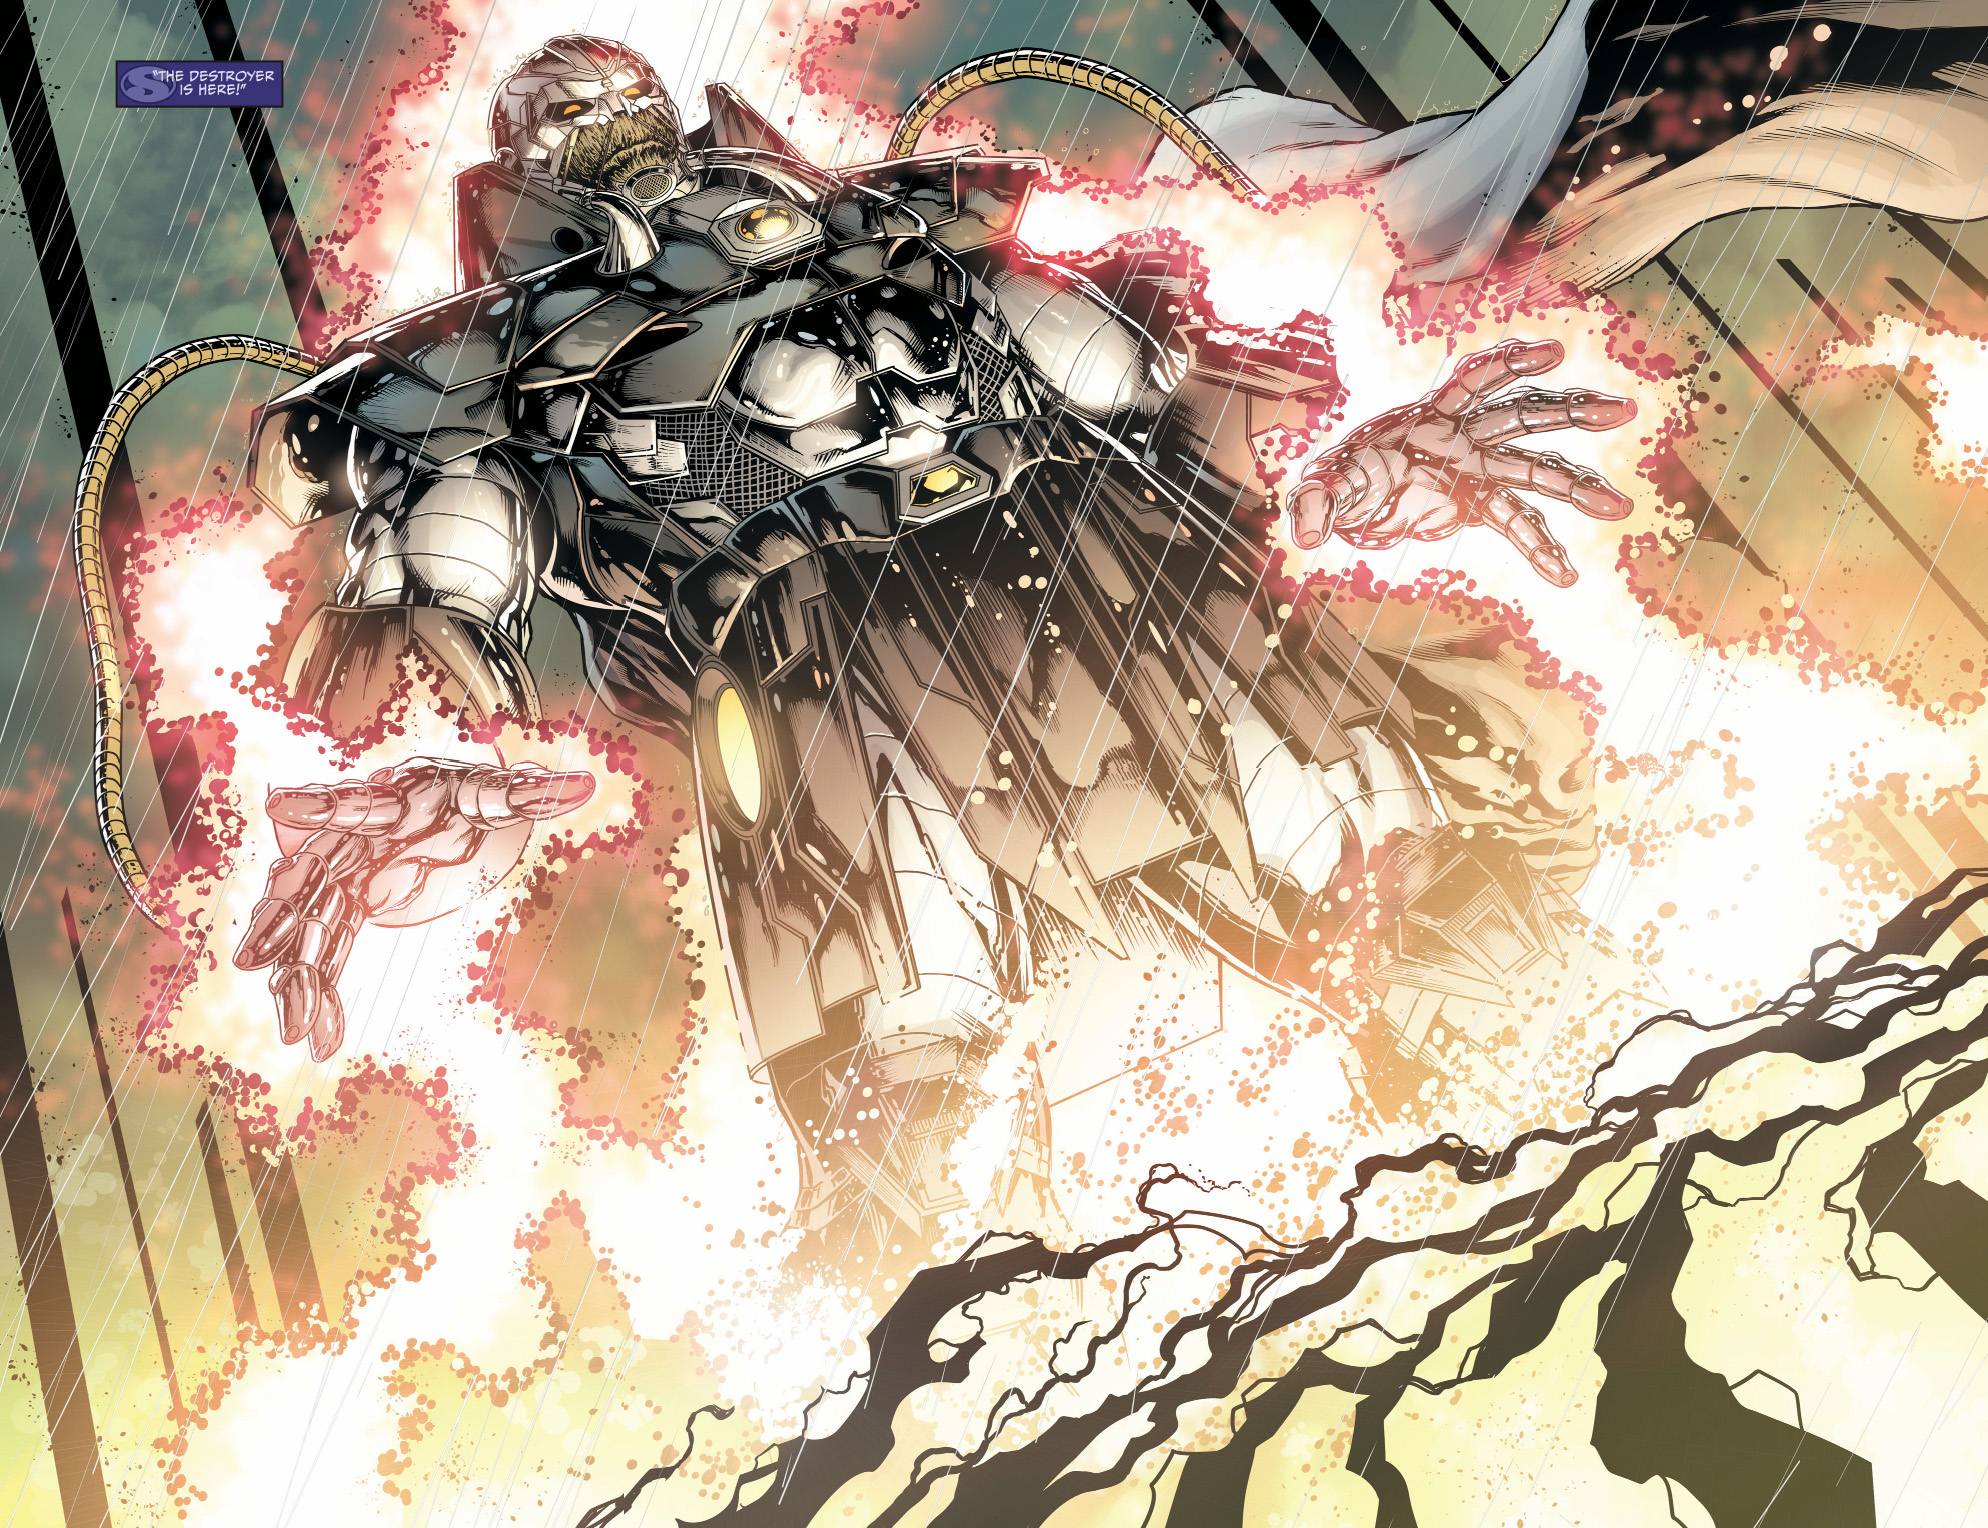 grail summons the anti-monitor to prime earth.